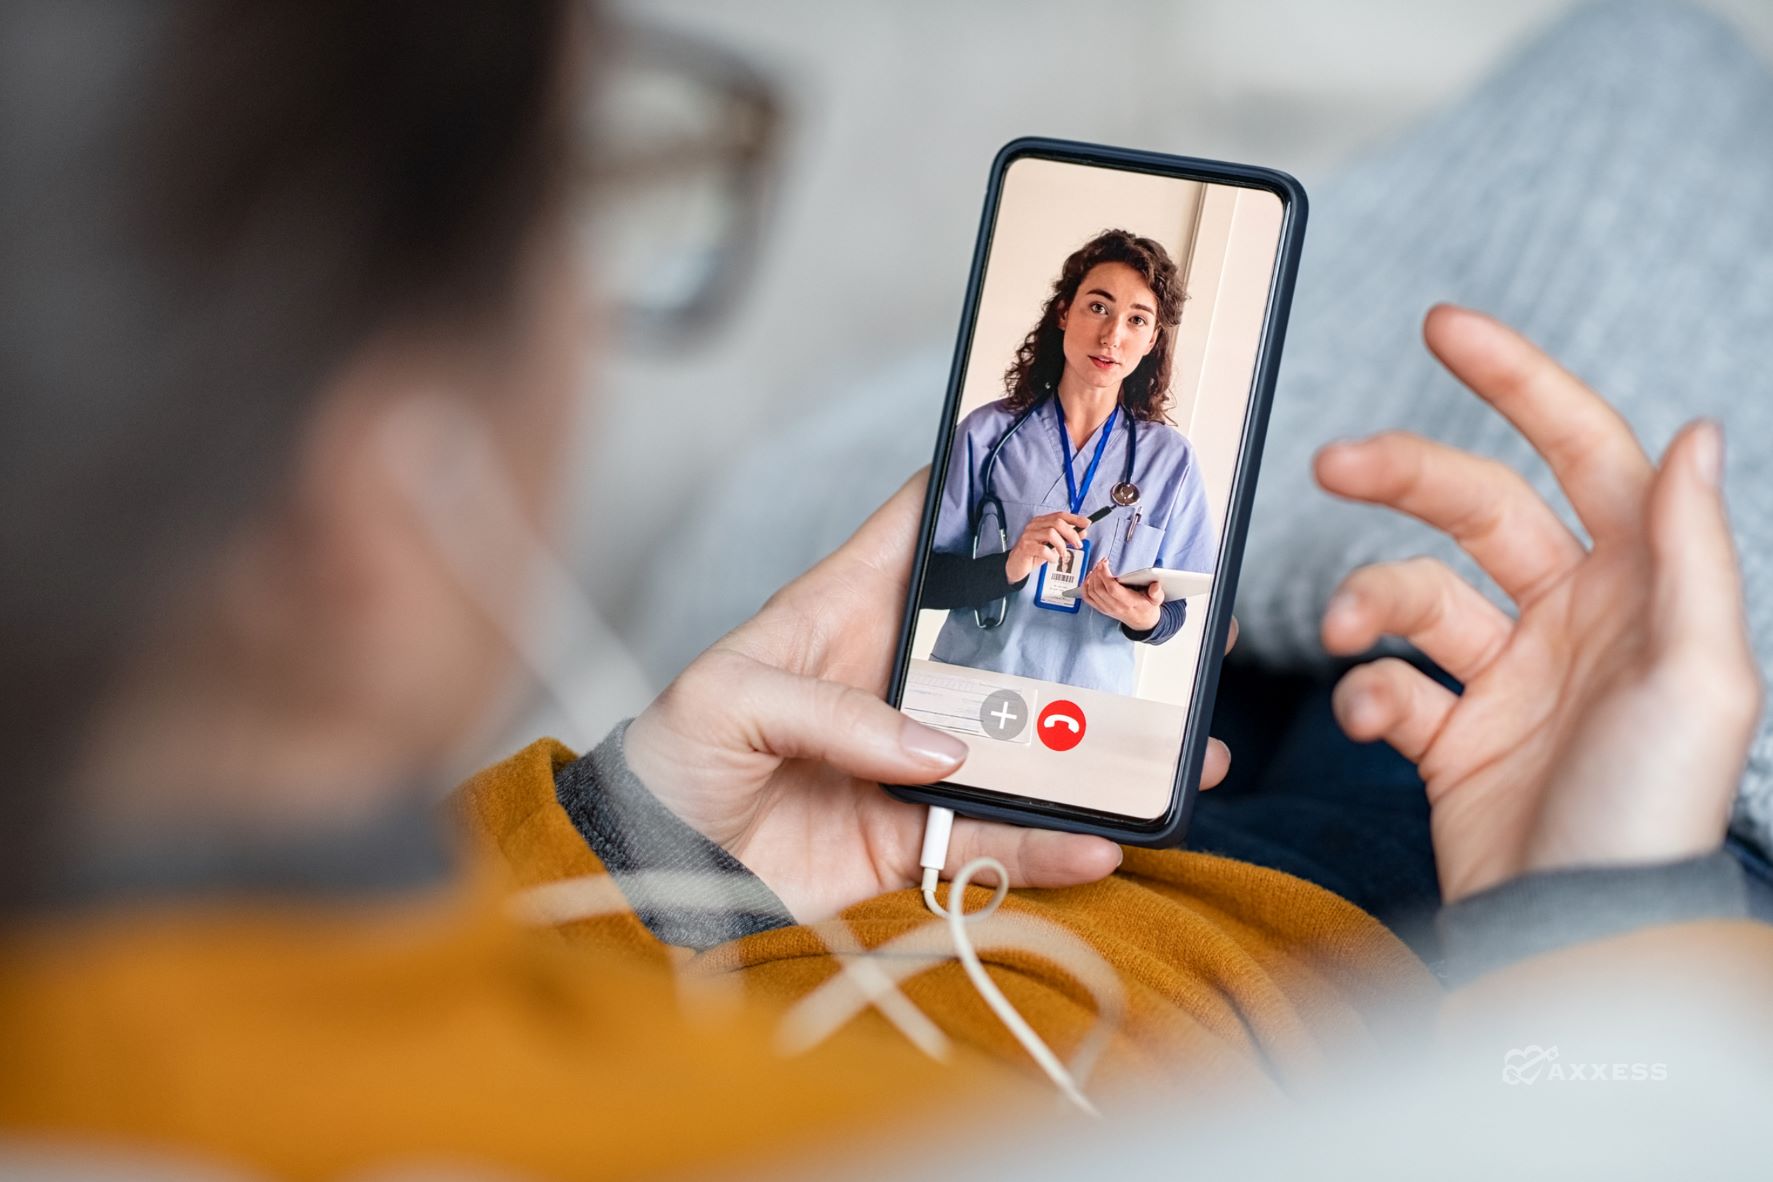 With recent reports that the cost of COVID-19 social isolation has reached nearly $7 billion, we may soon see remote care monitoring (RCM) in the home expand exponentially. RCM may soon be considered the “seventh discipline” on many home health plans of care.